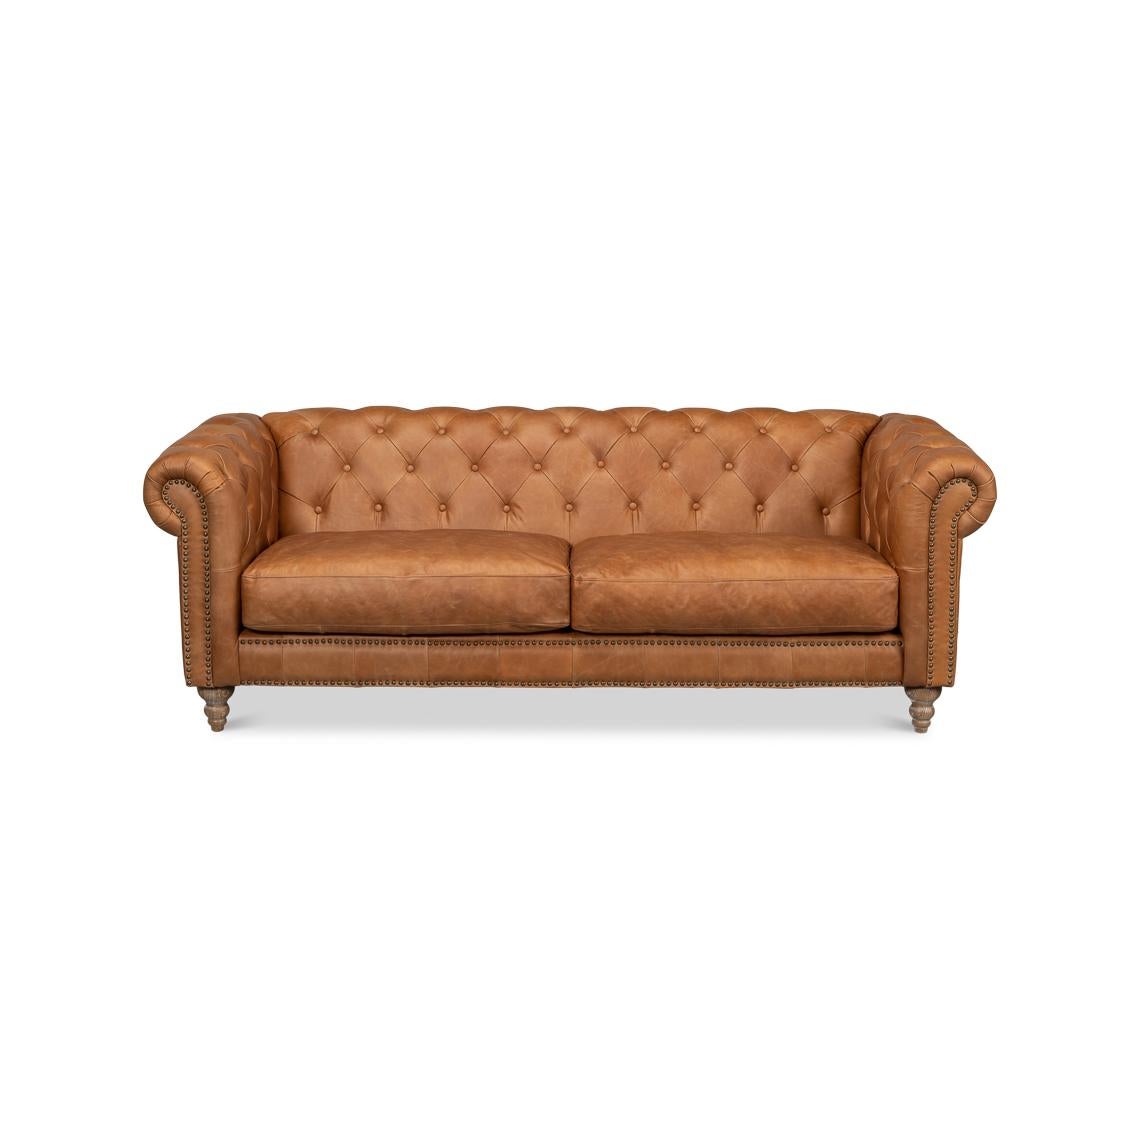 Crafted from premium top-grain leather, this sofa boasts a rich caramel hue that invites warmth into any living space. The intricate button-tufted detailing on the backrest provides a touch of aristocratic flair, while the plush cushion seat offers